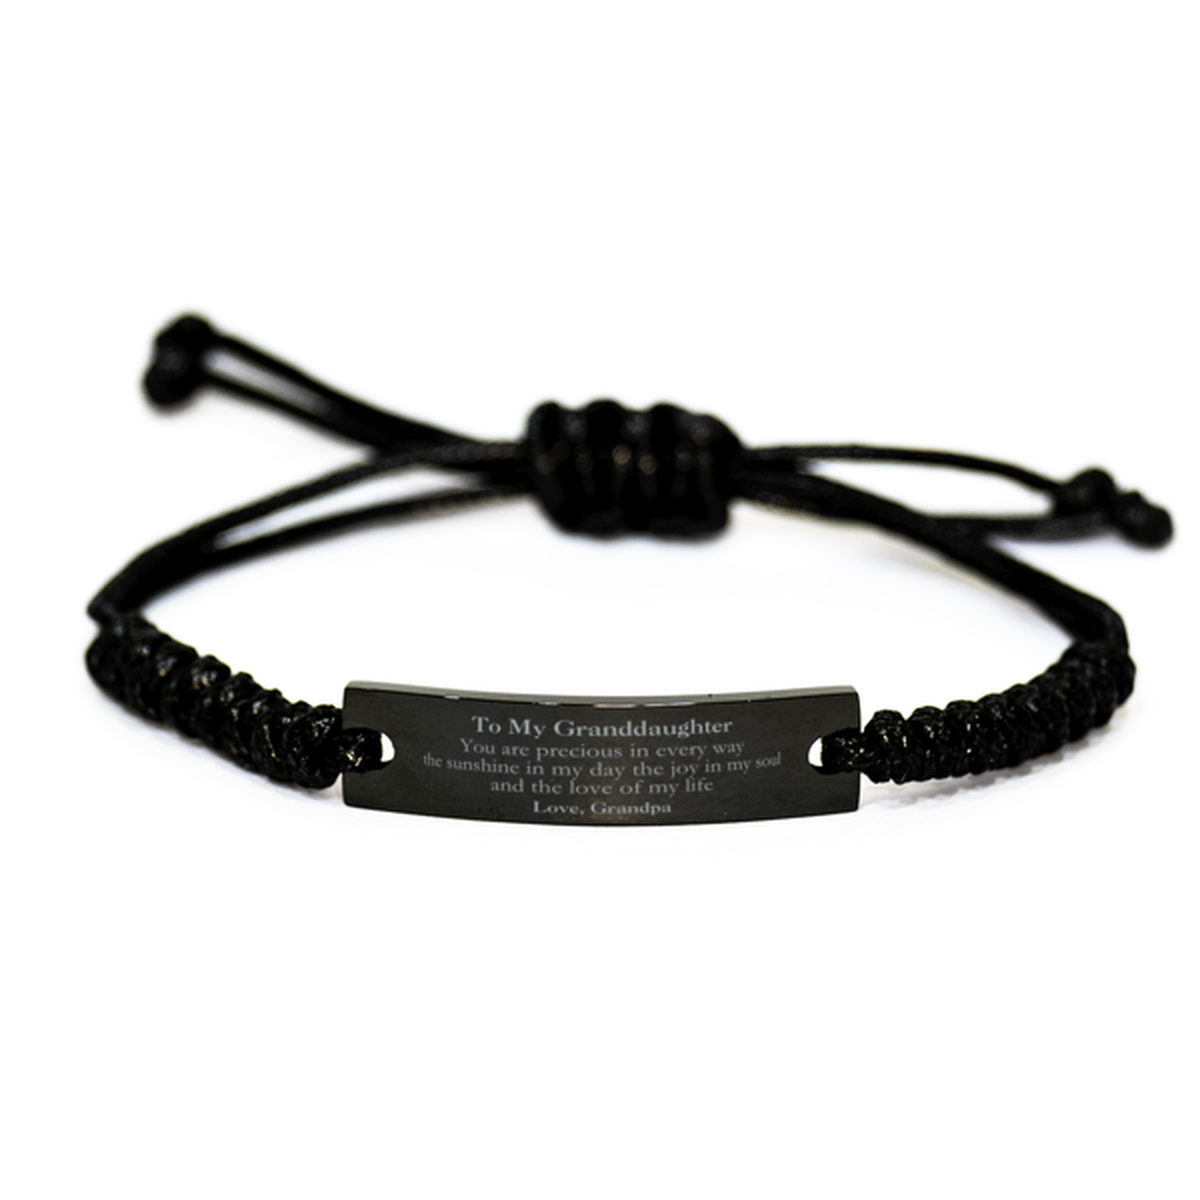 Graduation Gifts for Granddaughter Black Rope Bracelet Present from Grandpa, Christmas Granddaughter Birthday Gifts Granddaughter You are precious in every way the sunshine in my day. Love, Grandpa